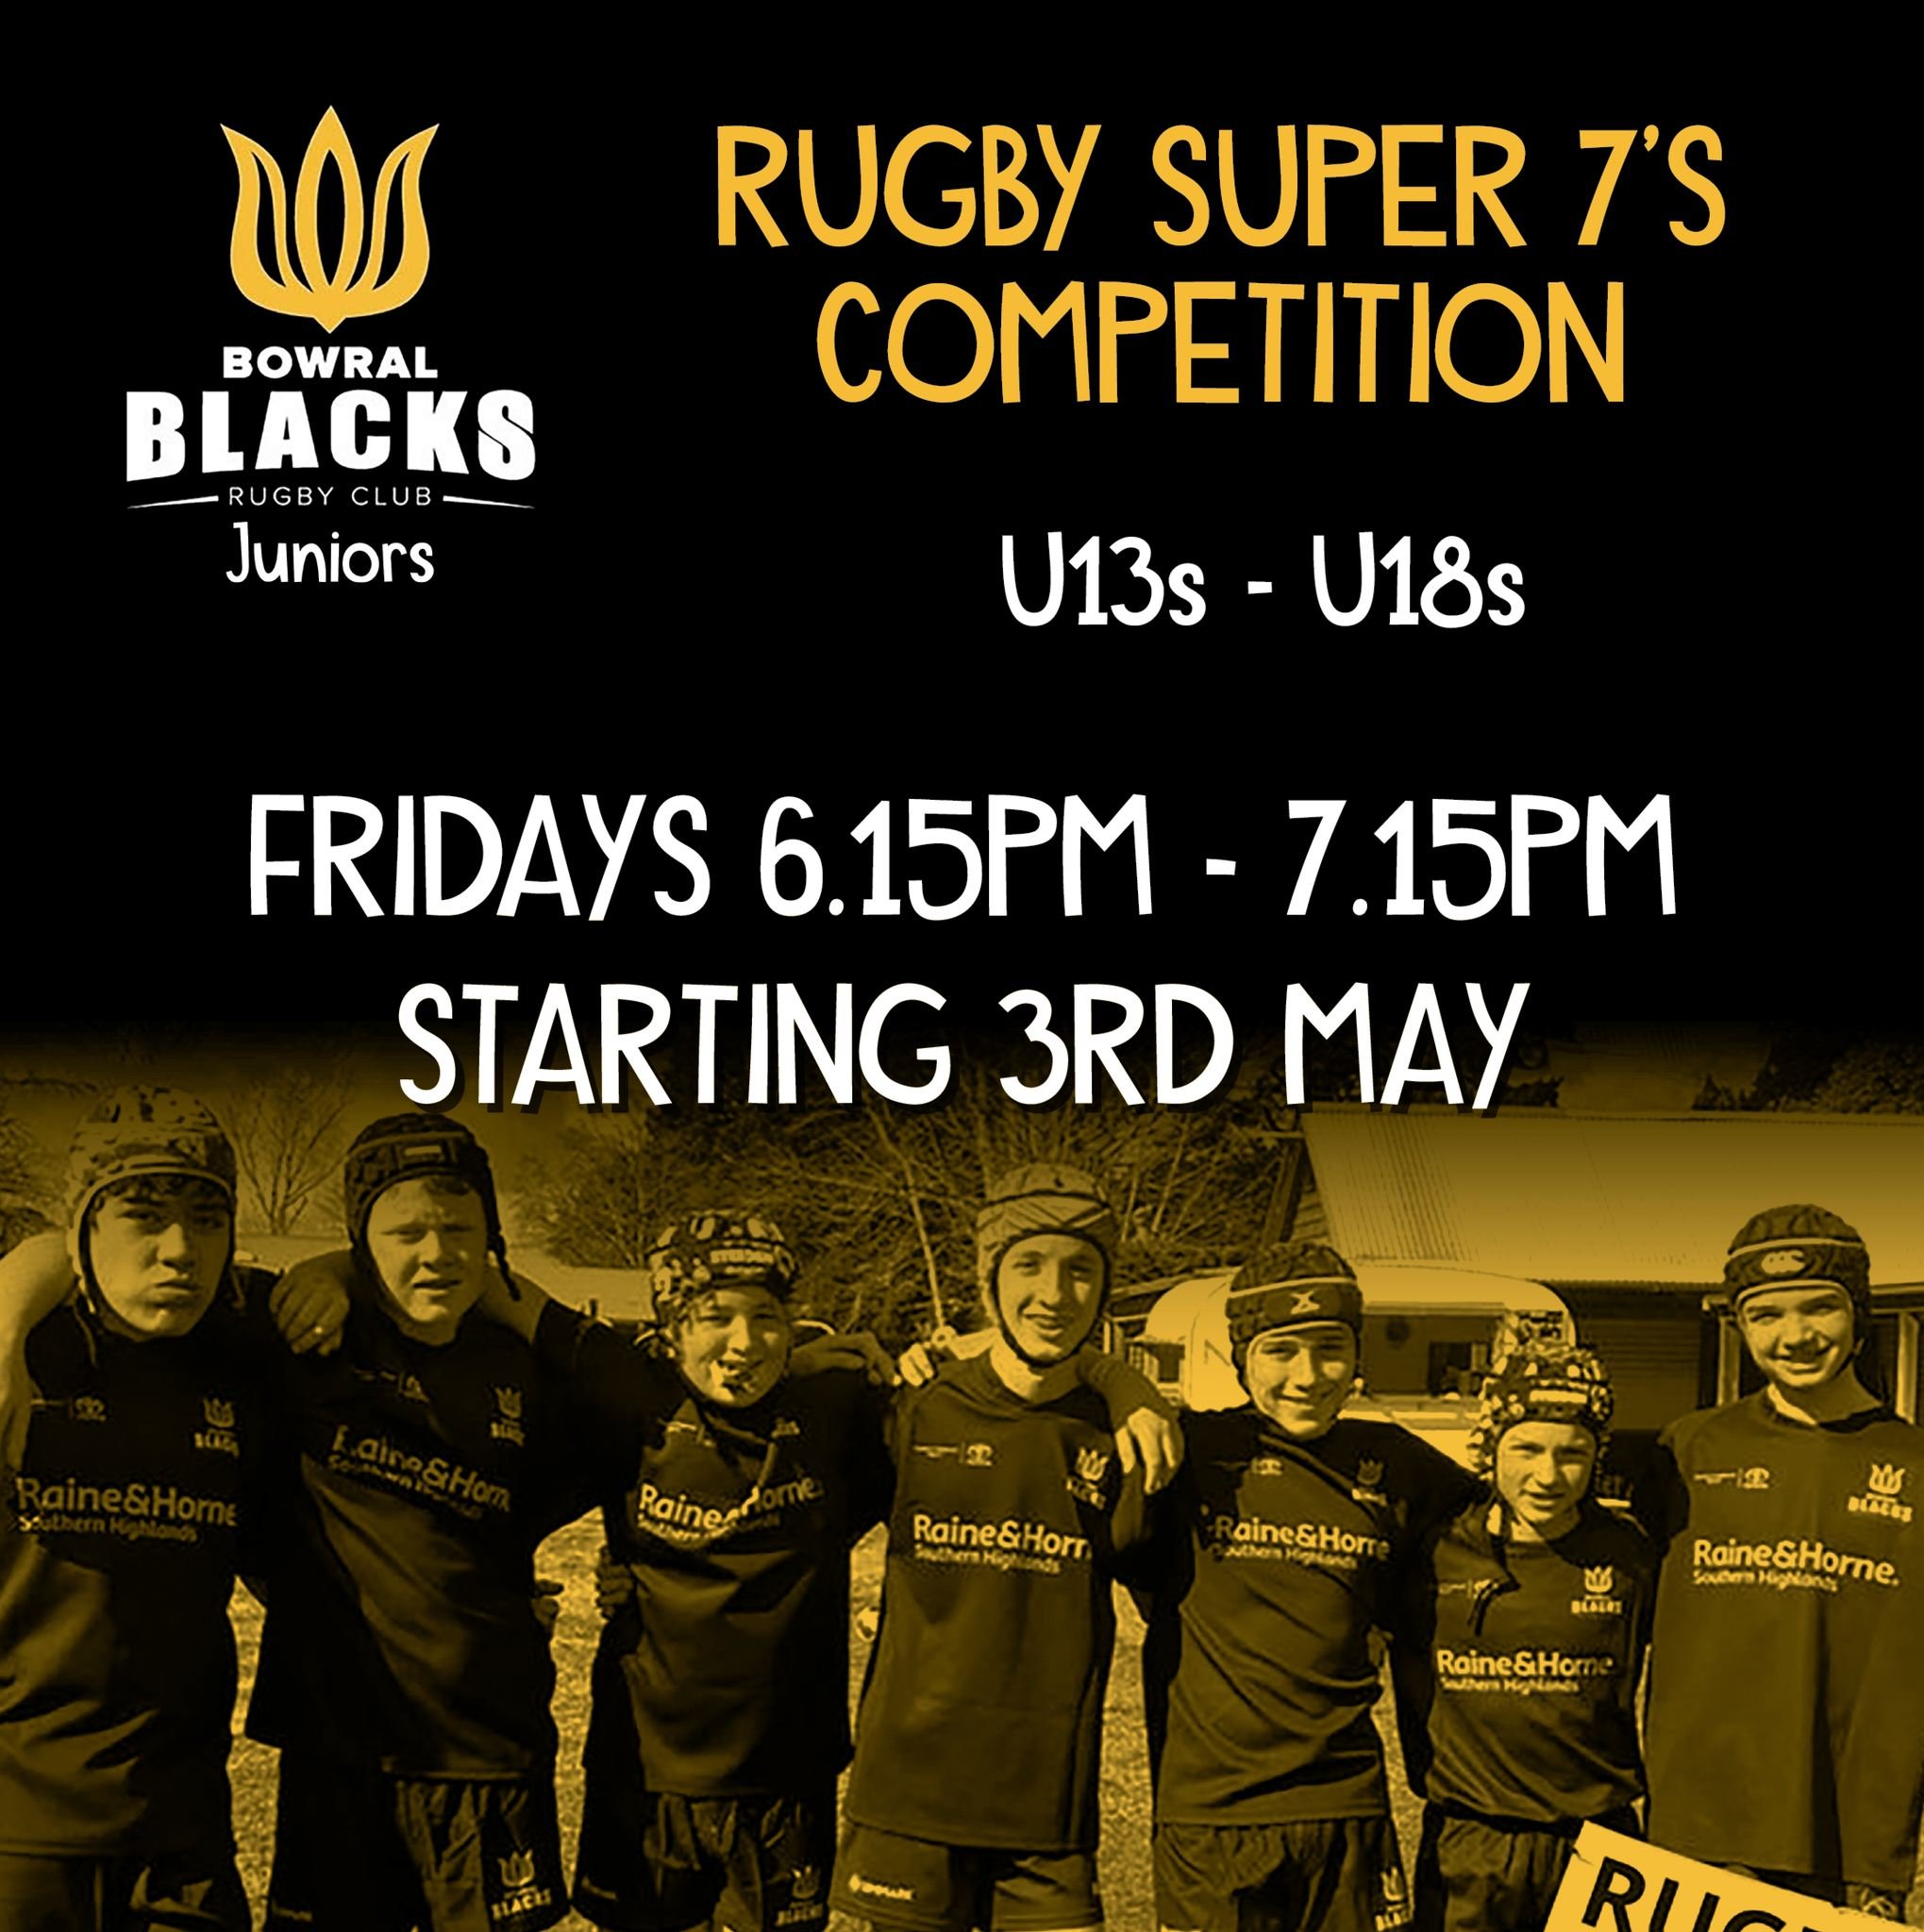 Super 7s start THIS FRIDAY!!!!

Rugby Super 7s is open to boys aged U13 - U18. 
Friday nights |  6.15pm - 7.15pm, starting on the 3rd May.
A round robin competition where teams play 2 x 14 minute games.
$16 per player - to be paid via Rugby Xplorer -